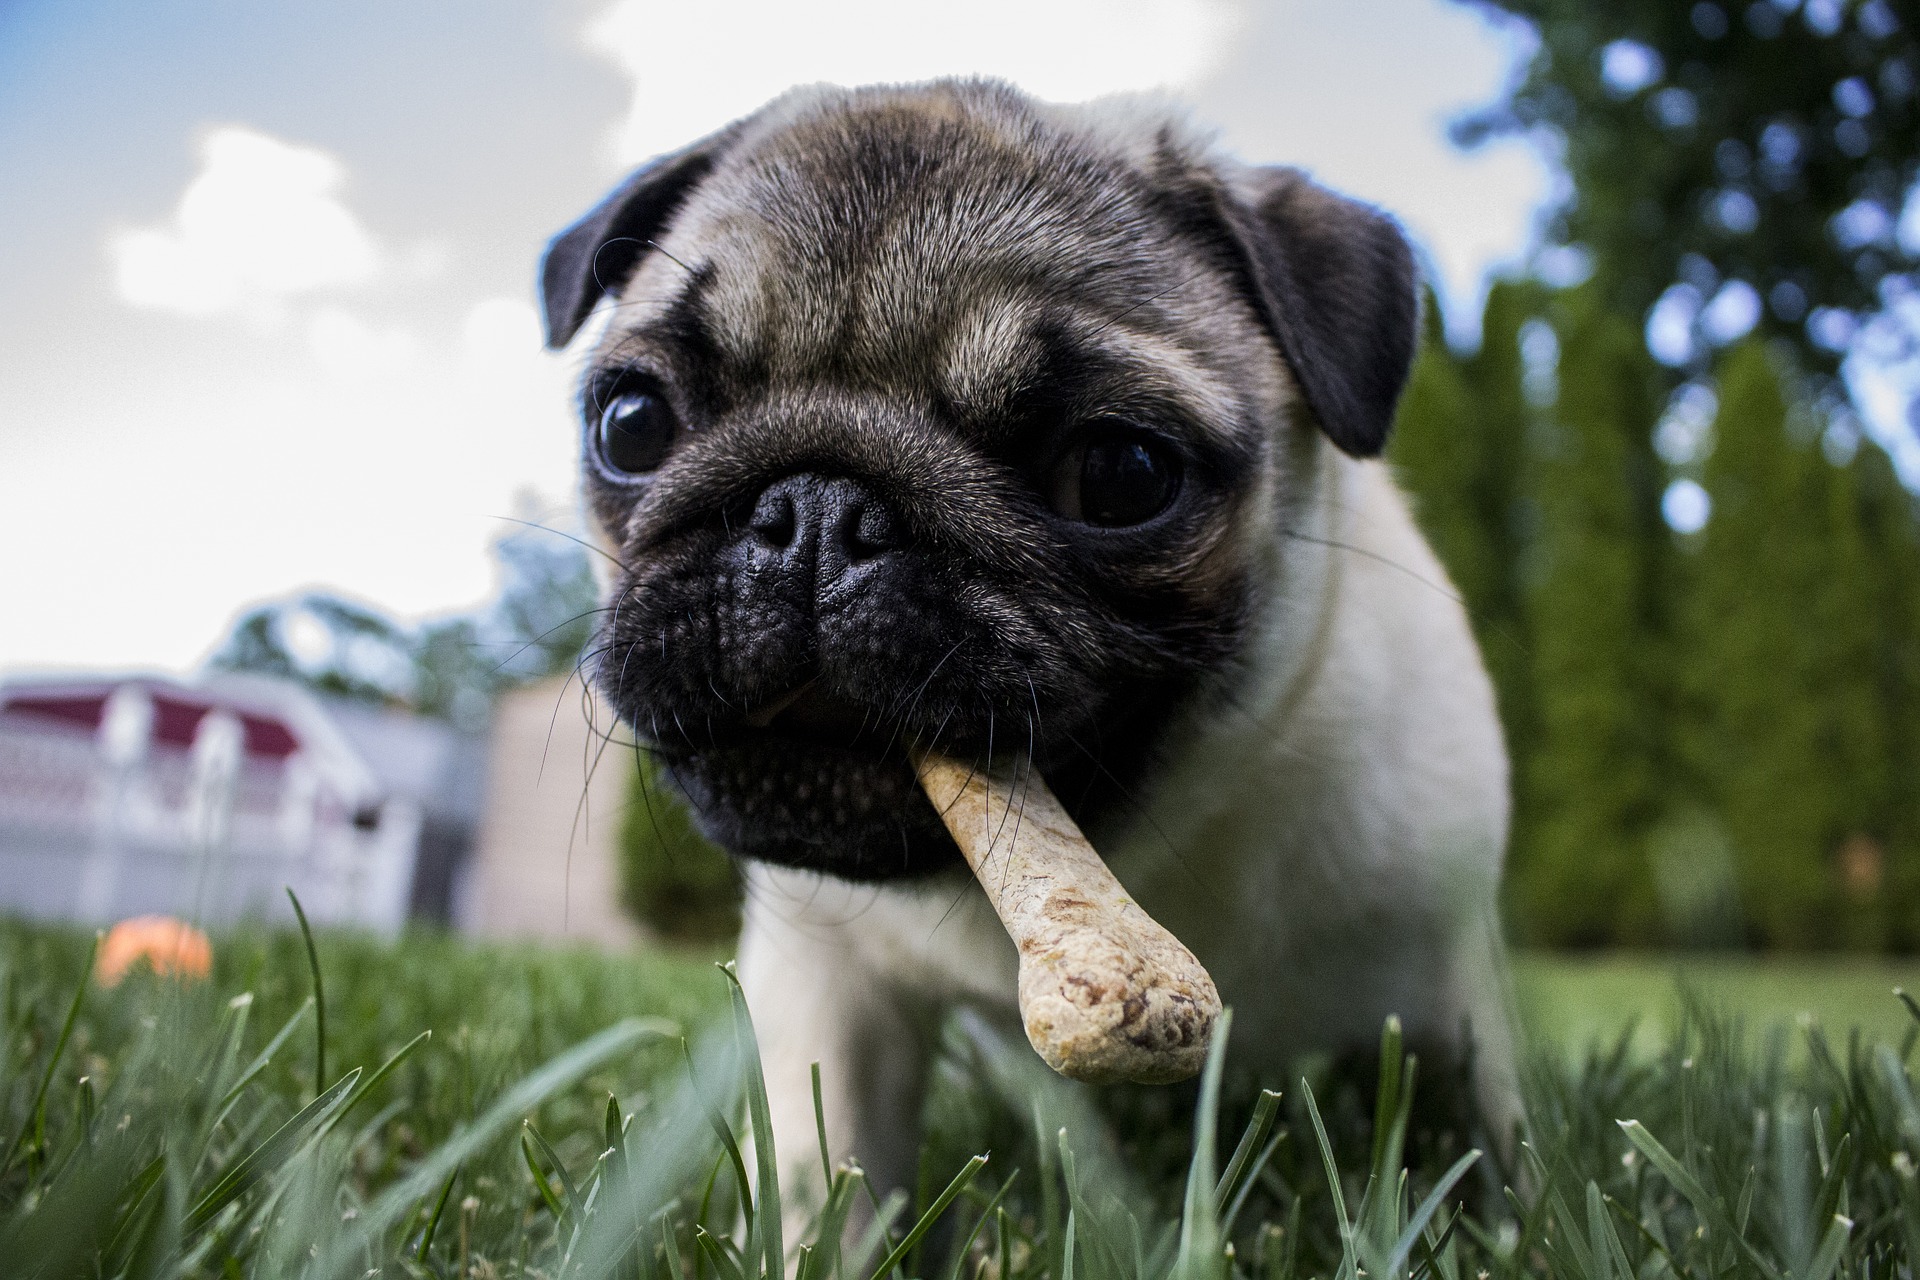 Flat-faced Dogs Most at Risk of Heat Stroke